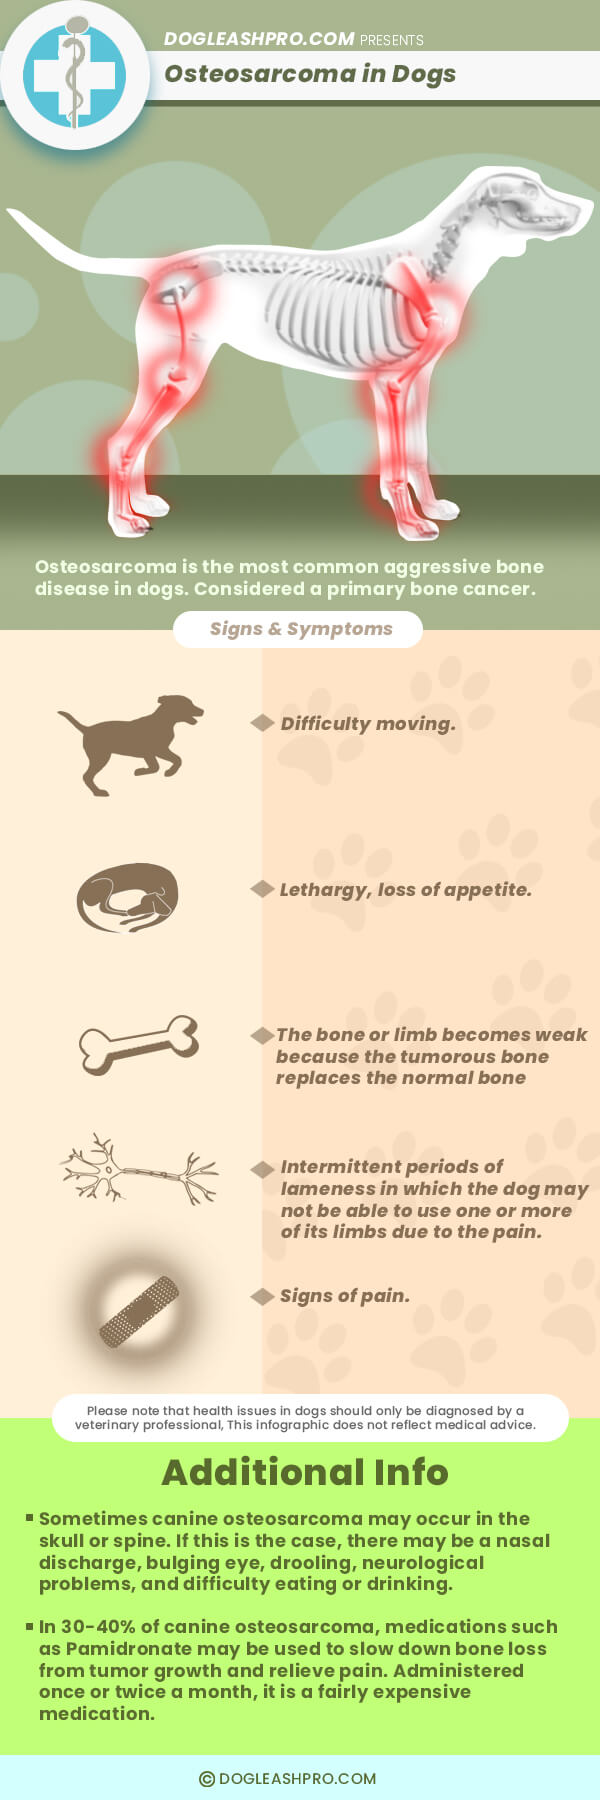 Infographic of Dog with Osteosarcoma